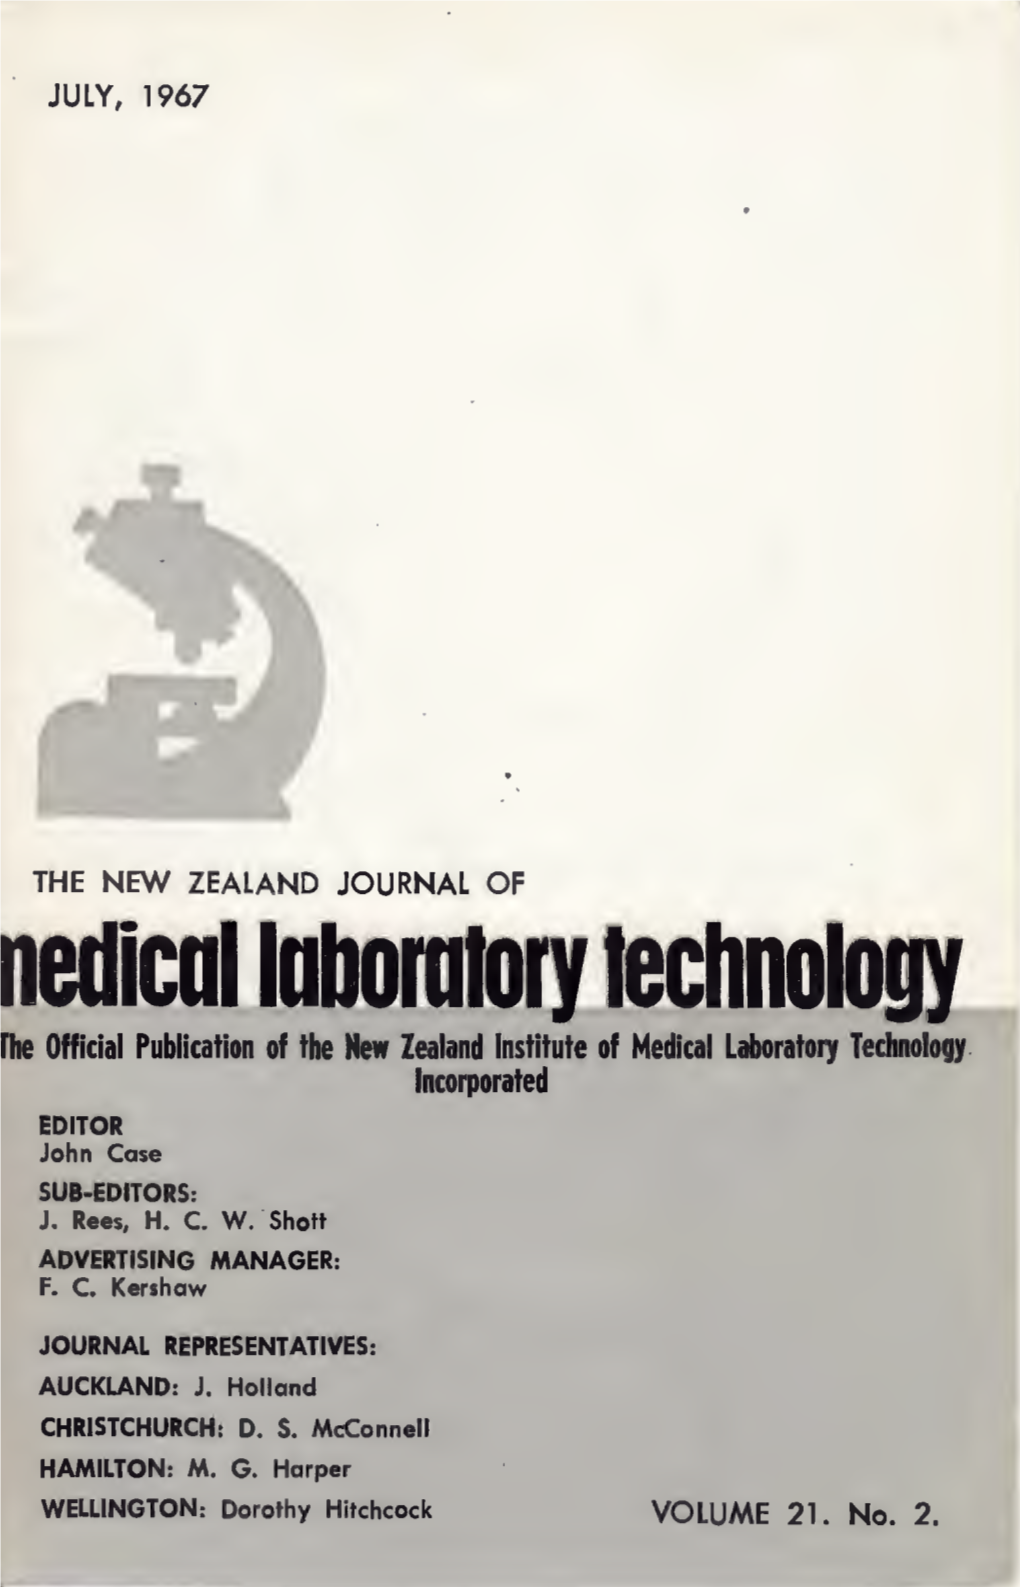 Nedicnllnbomtory Technology the Official Publication of the New Zealand Institute of Medical Laboratory Technology